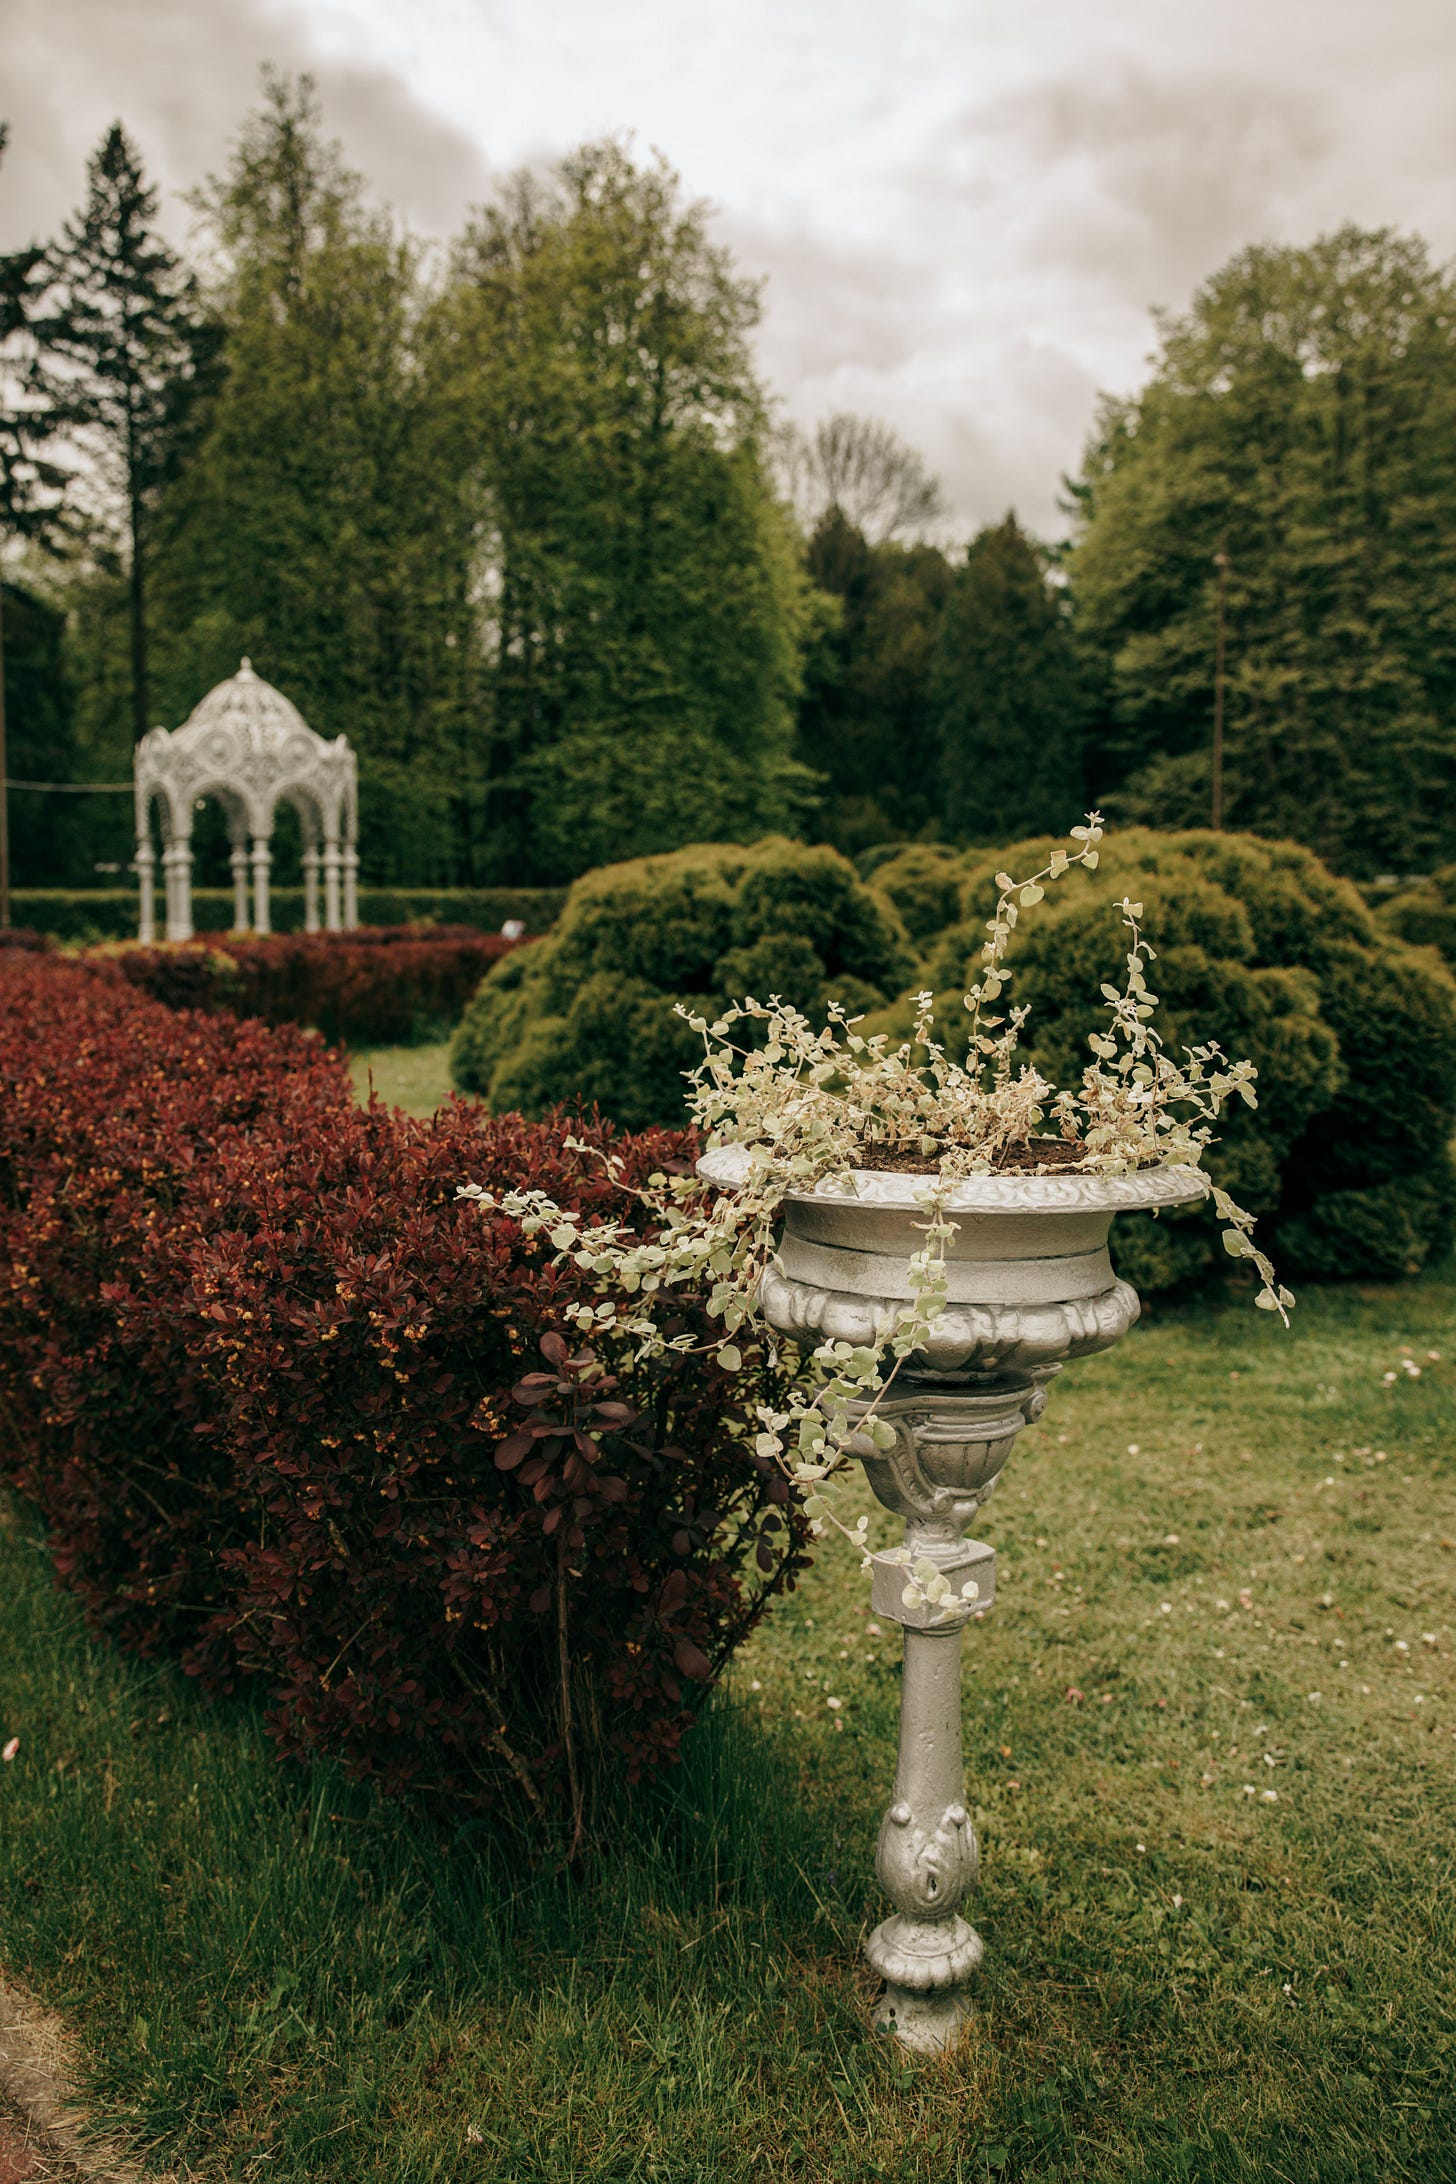 A picture of a garden. The far background are trees. Then there is a white gazebo. Some bushes. A white flower pot on a pedestal in the foreground.